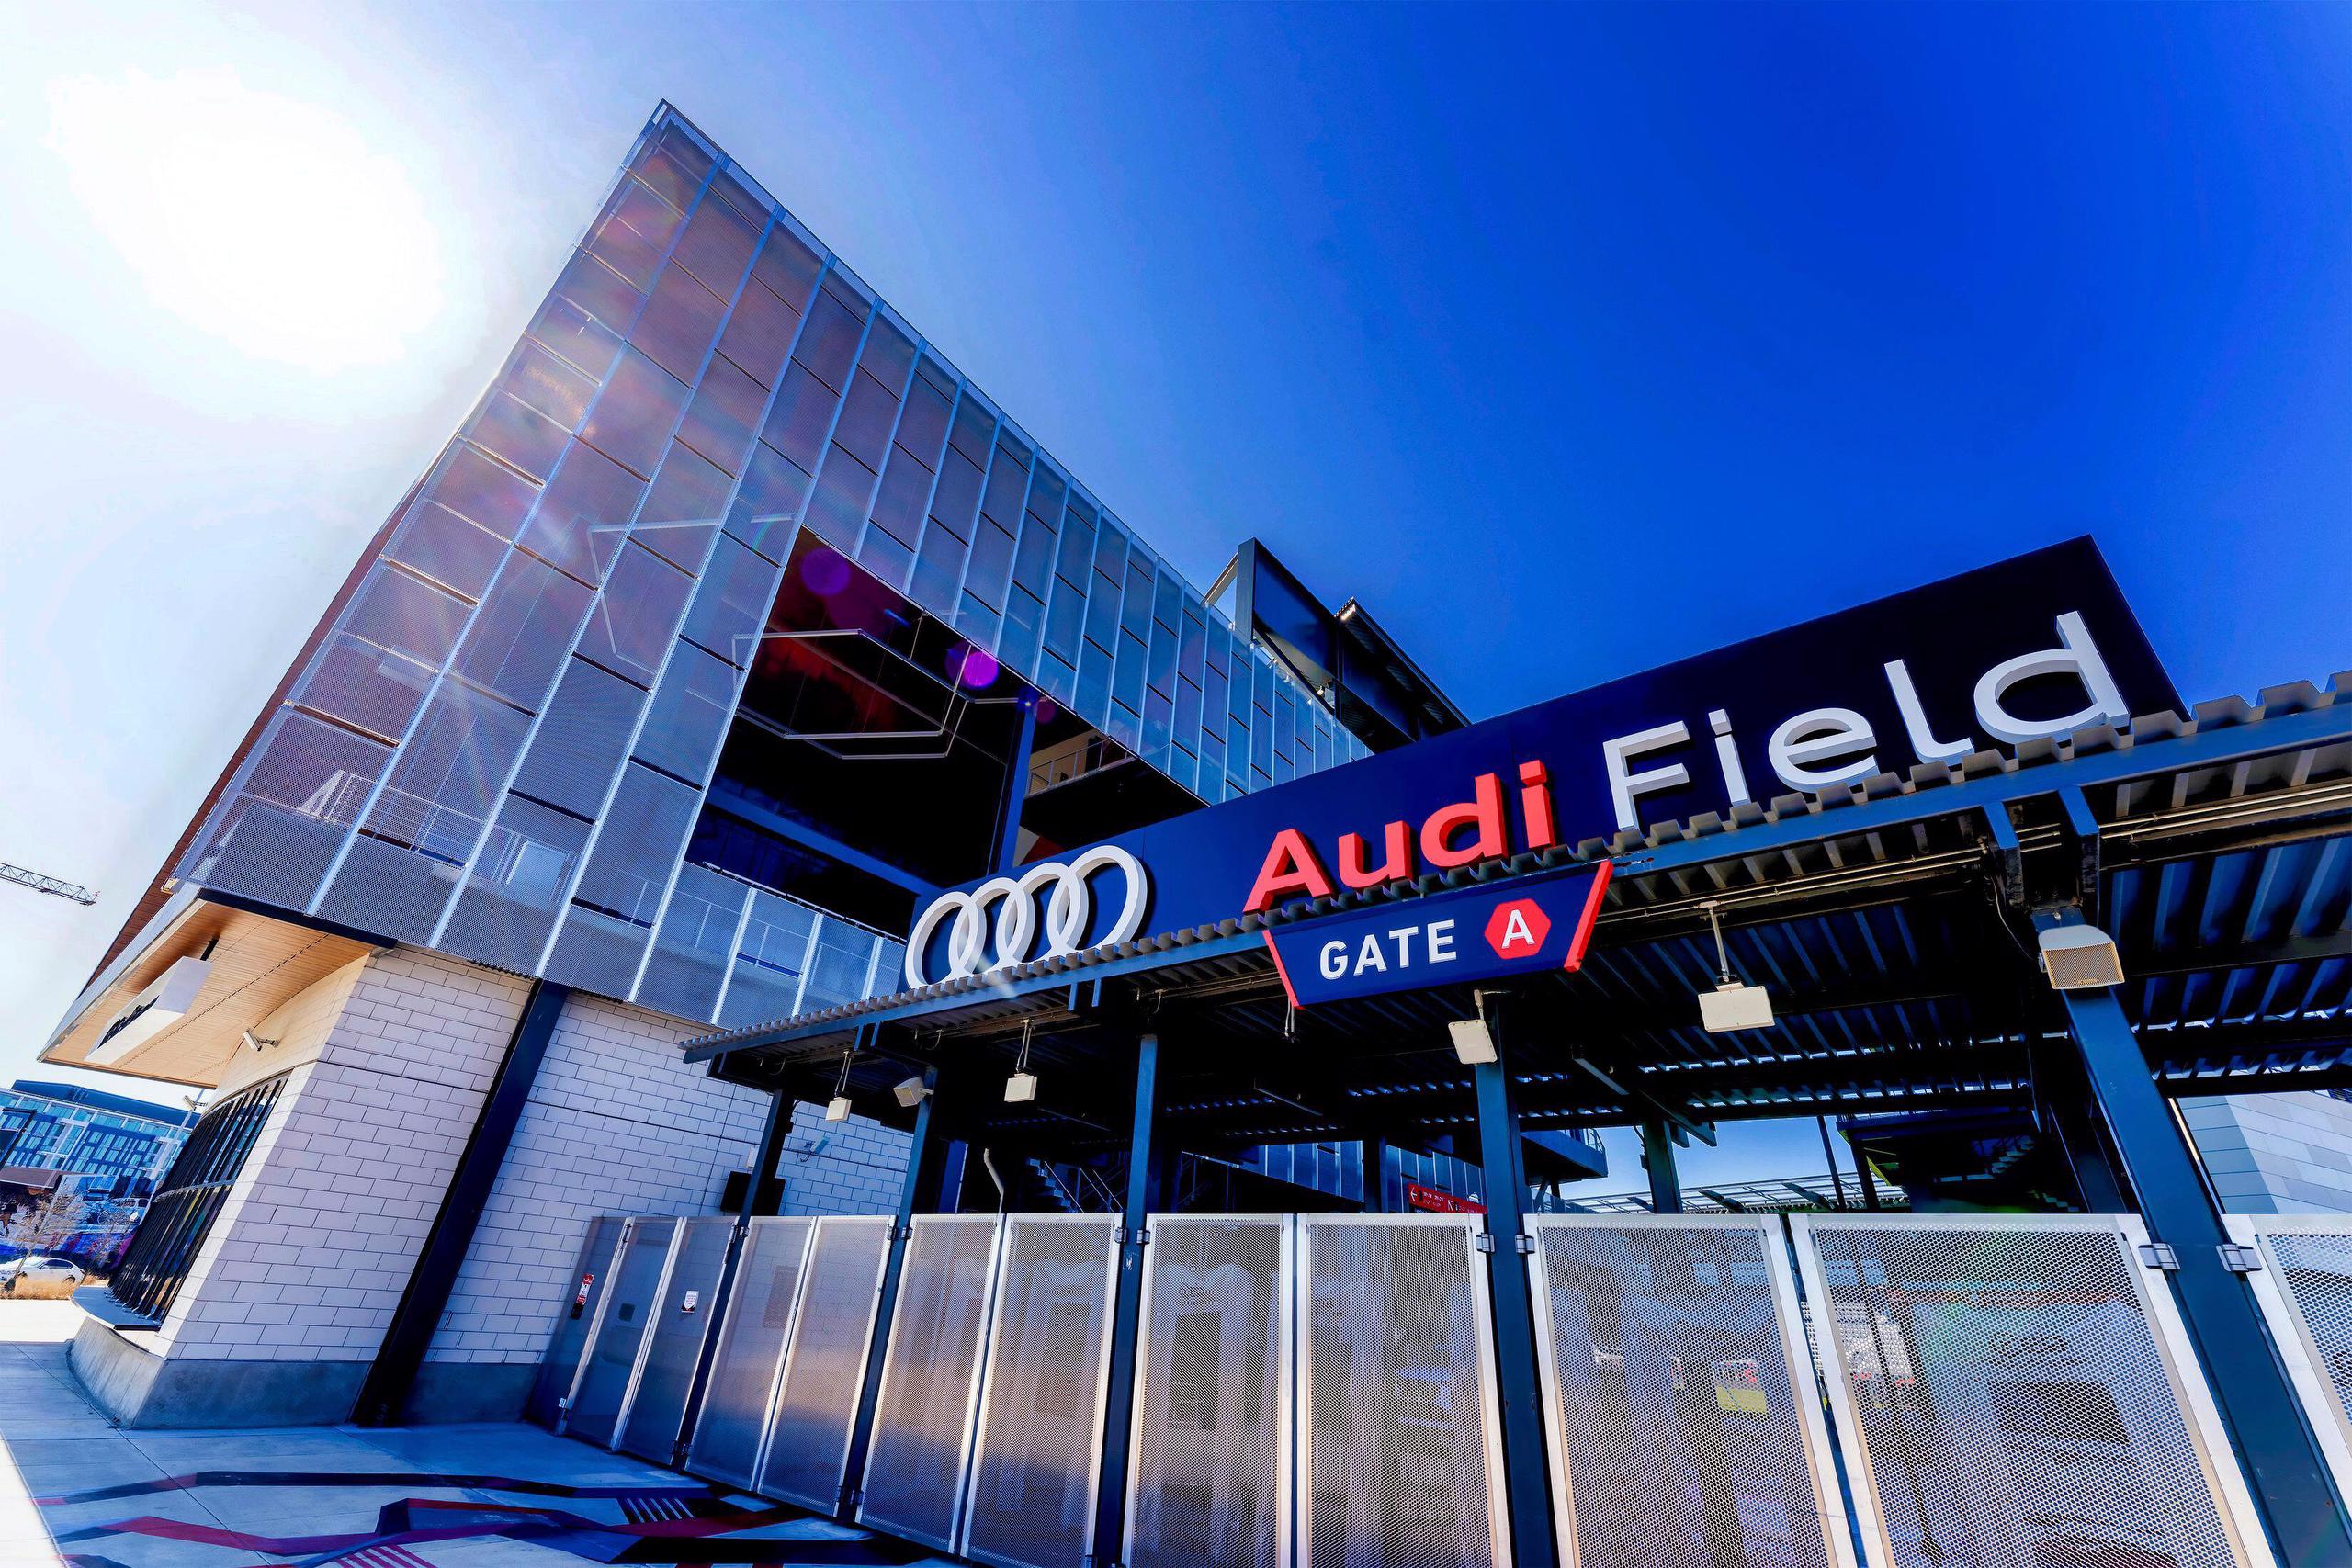 Audi Field Perforated Wall & Fence